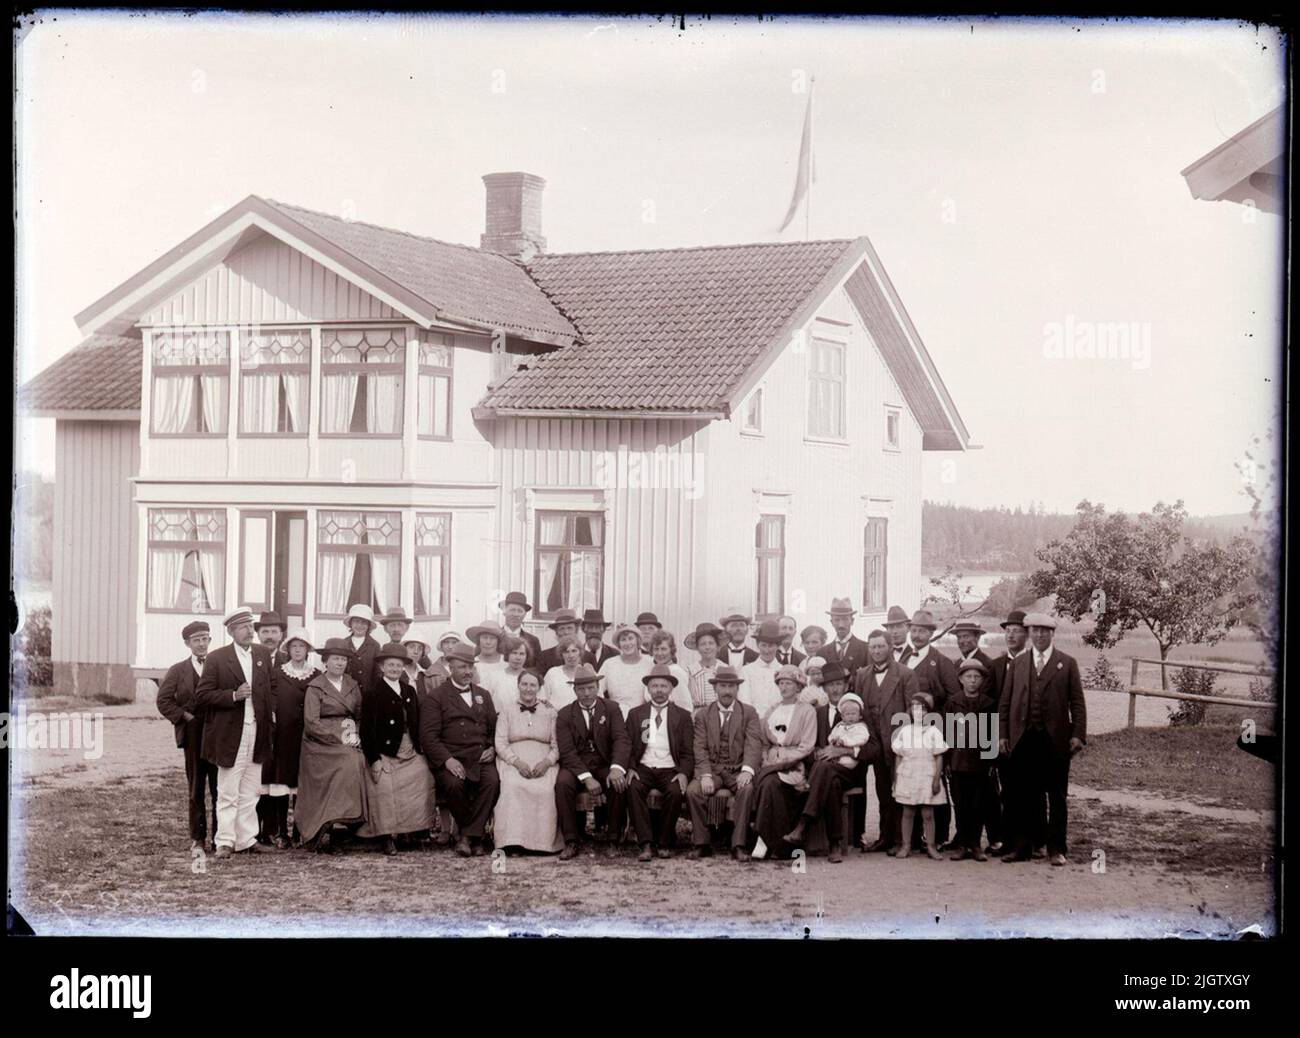 According to notes: 'July 19, 1921. Frisinnaded Association at Summer Meeting at Anders Pettersson at Elsedöd. . Row 2: Sören Grundberg (Young Man in Black Screen cap). No. 2 From left in white screen cap probably station champion A.H. Svahn. At the far right Axel Sohlberg (dressed in cap) Bakersta row: No. 8 Forest guard Albert Eriksson (hat and mustache ), Melker Hansson. ”The woman with striped dress and black hat can be Karin Elmér. A large group of people, 39 - 40, stand in front of a larger residential building. Sören Grundberg (1905-1998), Axel Sohlberg (1879-1941), Melker Hansson (1898 Stock Photo